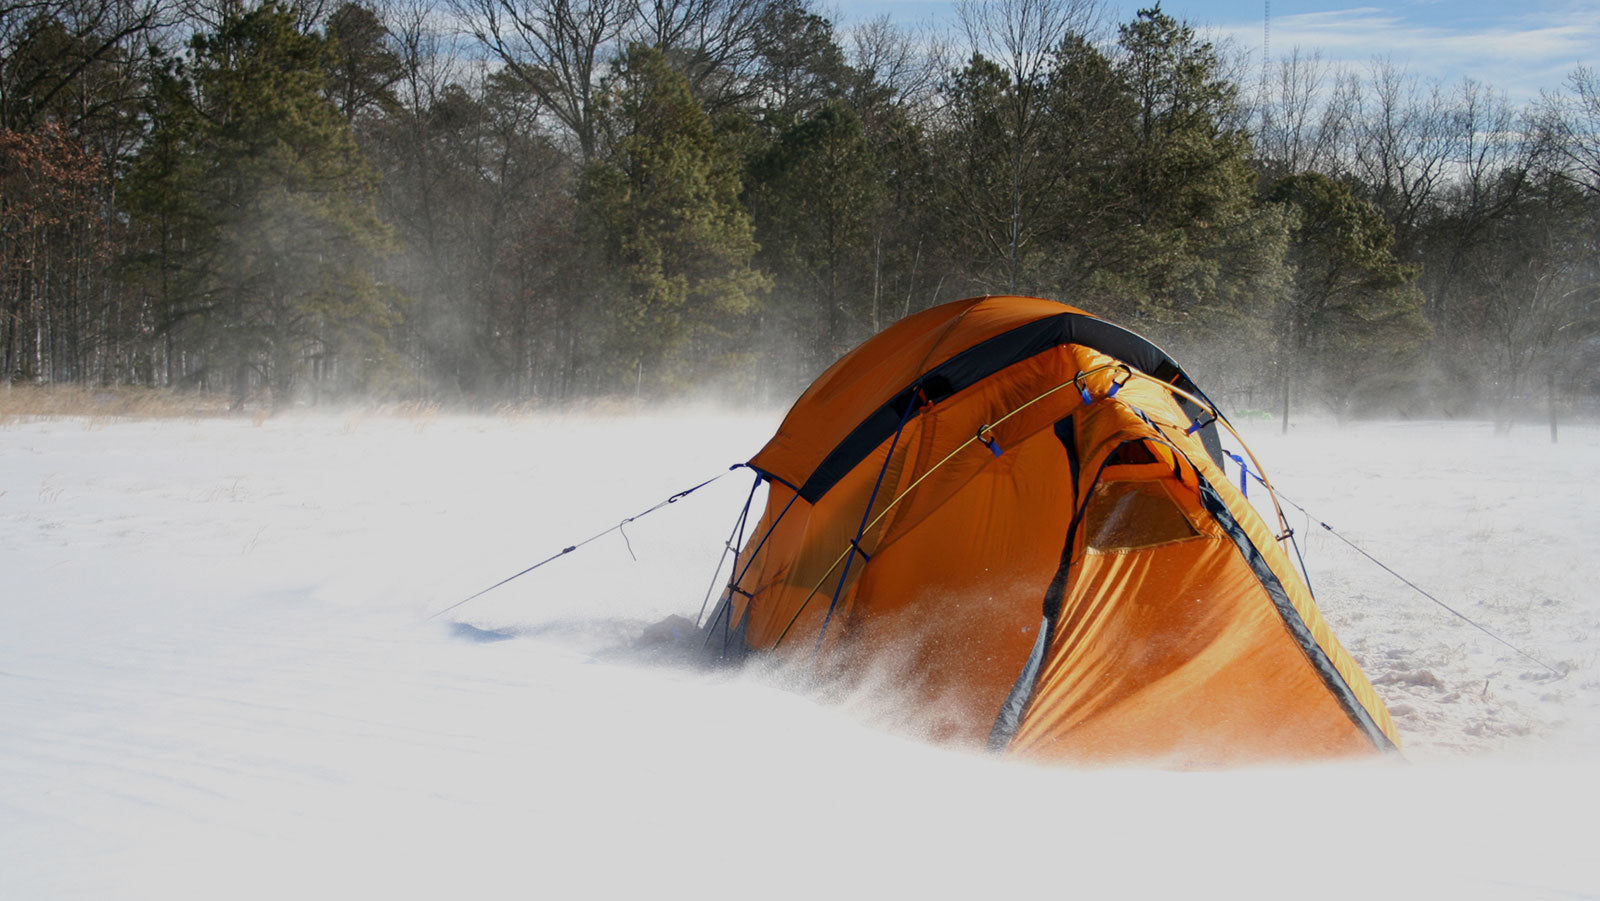 Orange tent on the snowy forest ground.